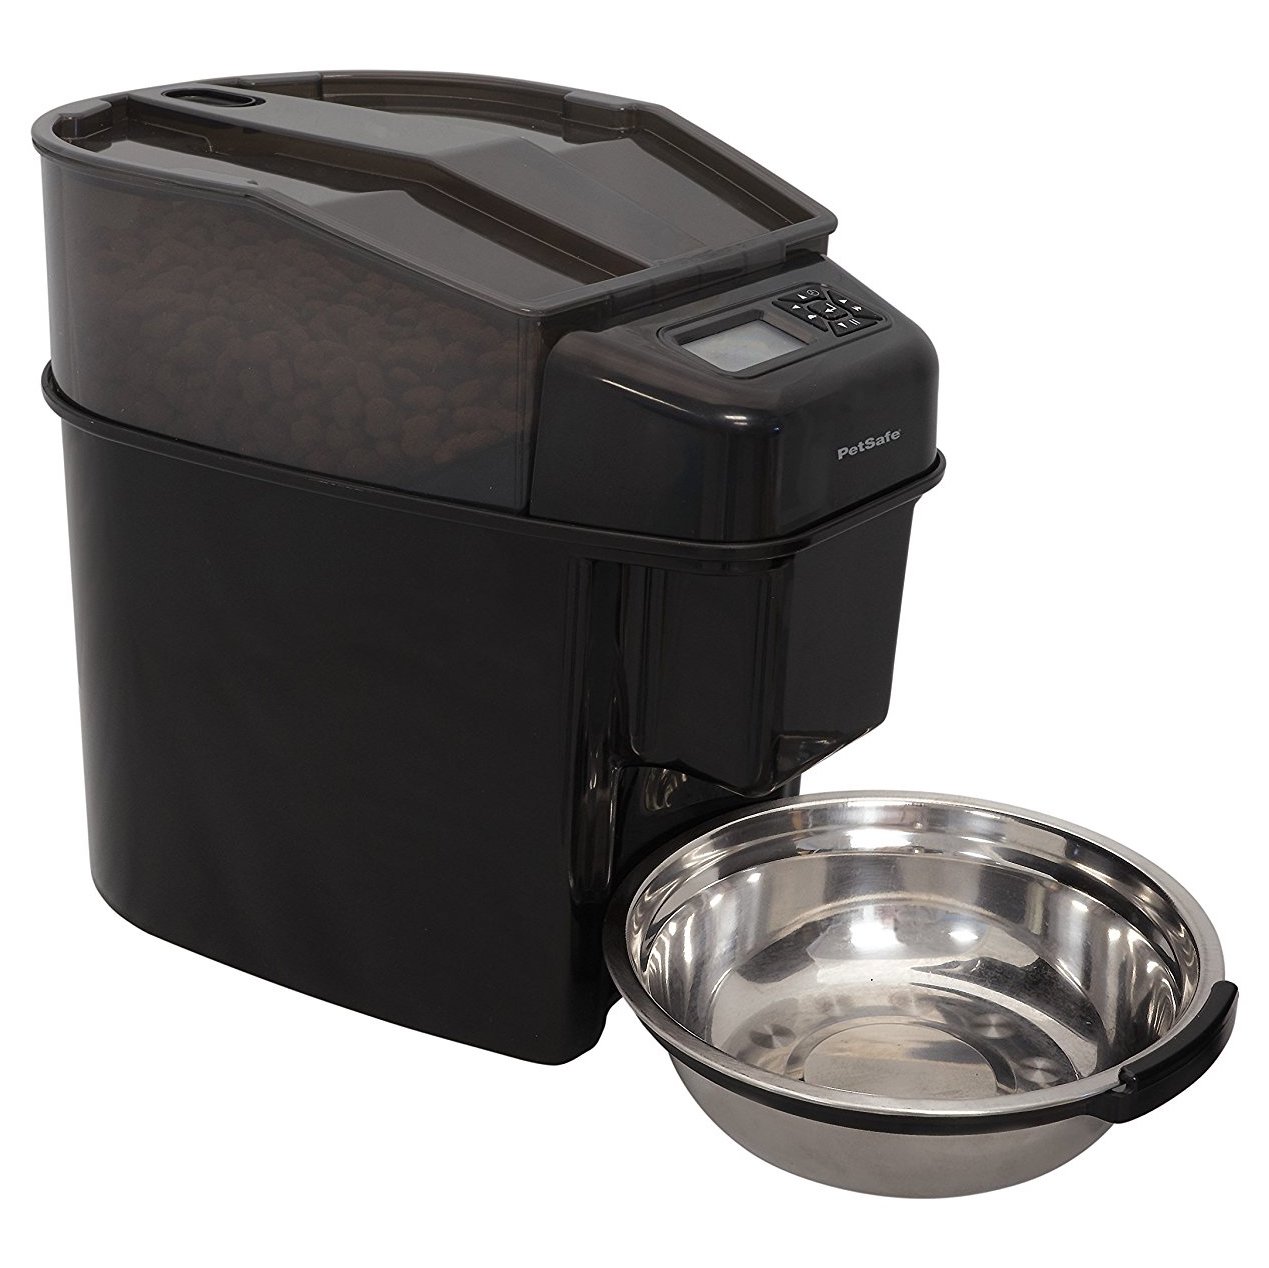 Your Pup Deserves The Finer Things, Like This Automatic Feeder - BroBible